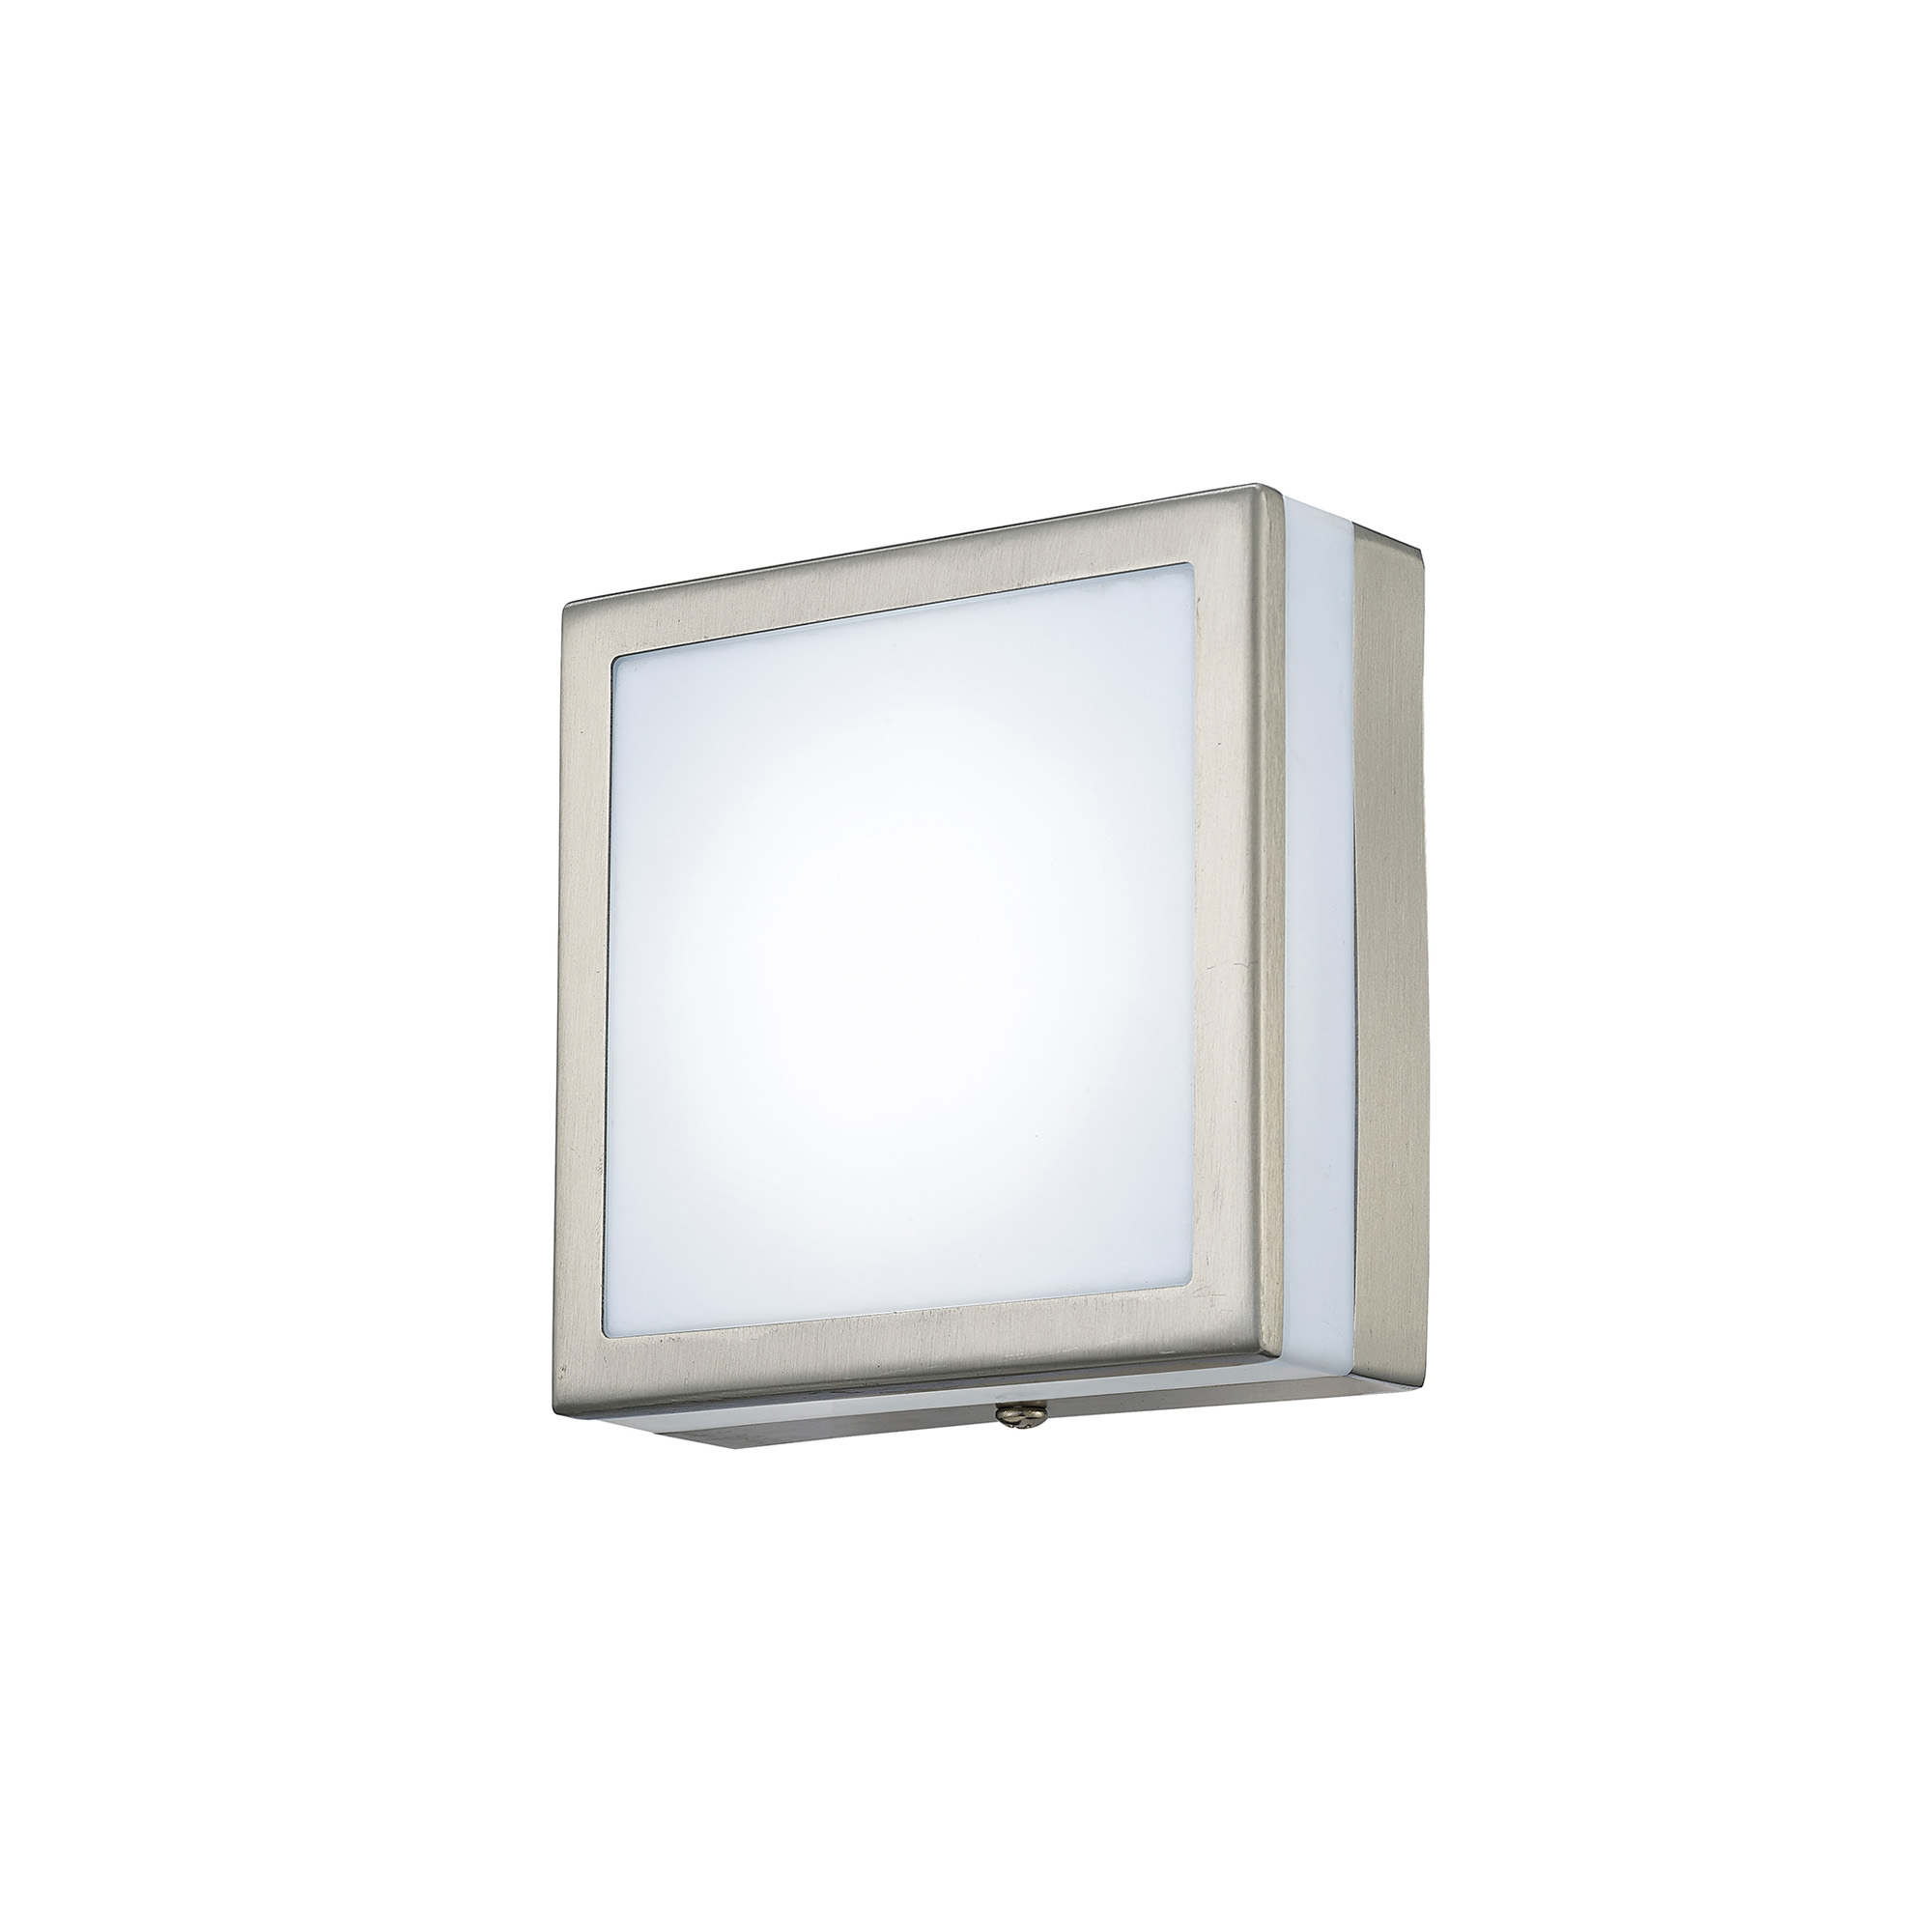 D0083  Aldo IP44 2.4W LED Square Wall Lamp; Louvre Design Stainless Steel